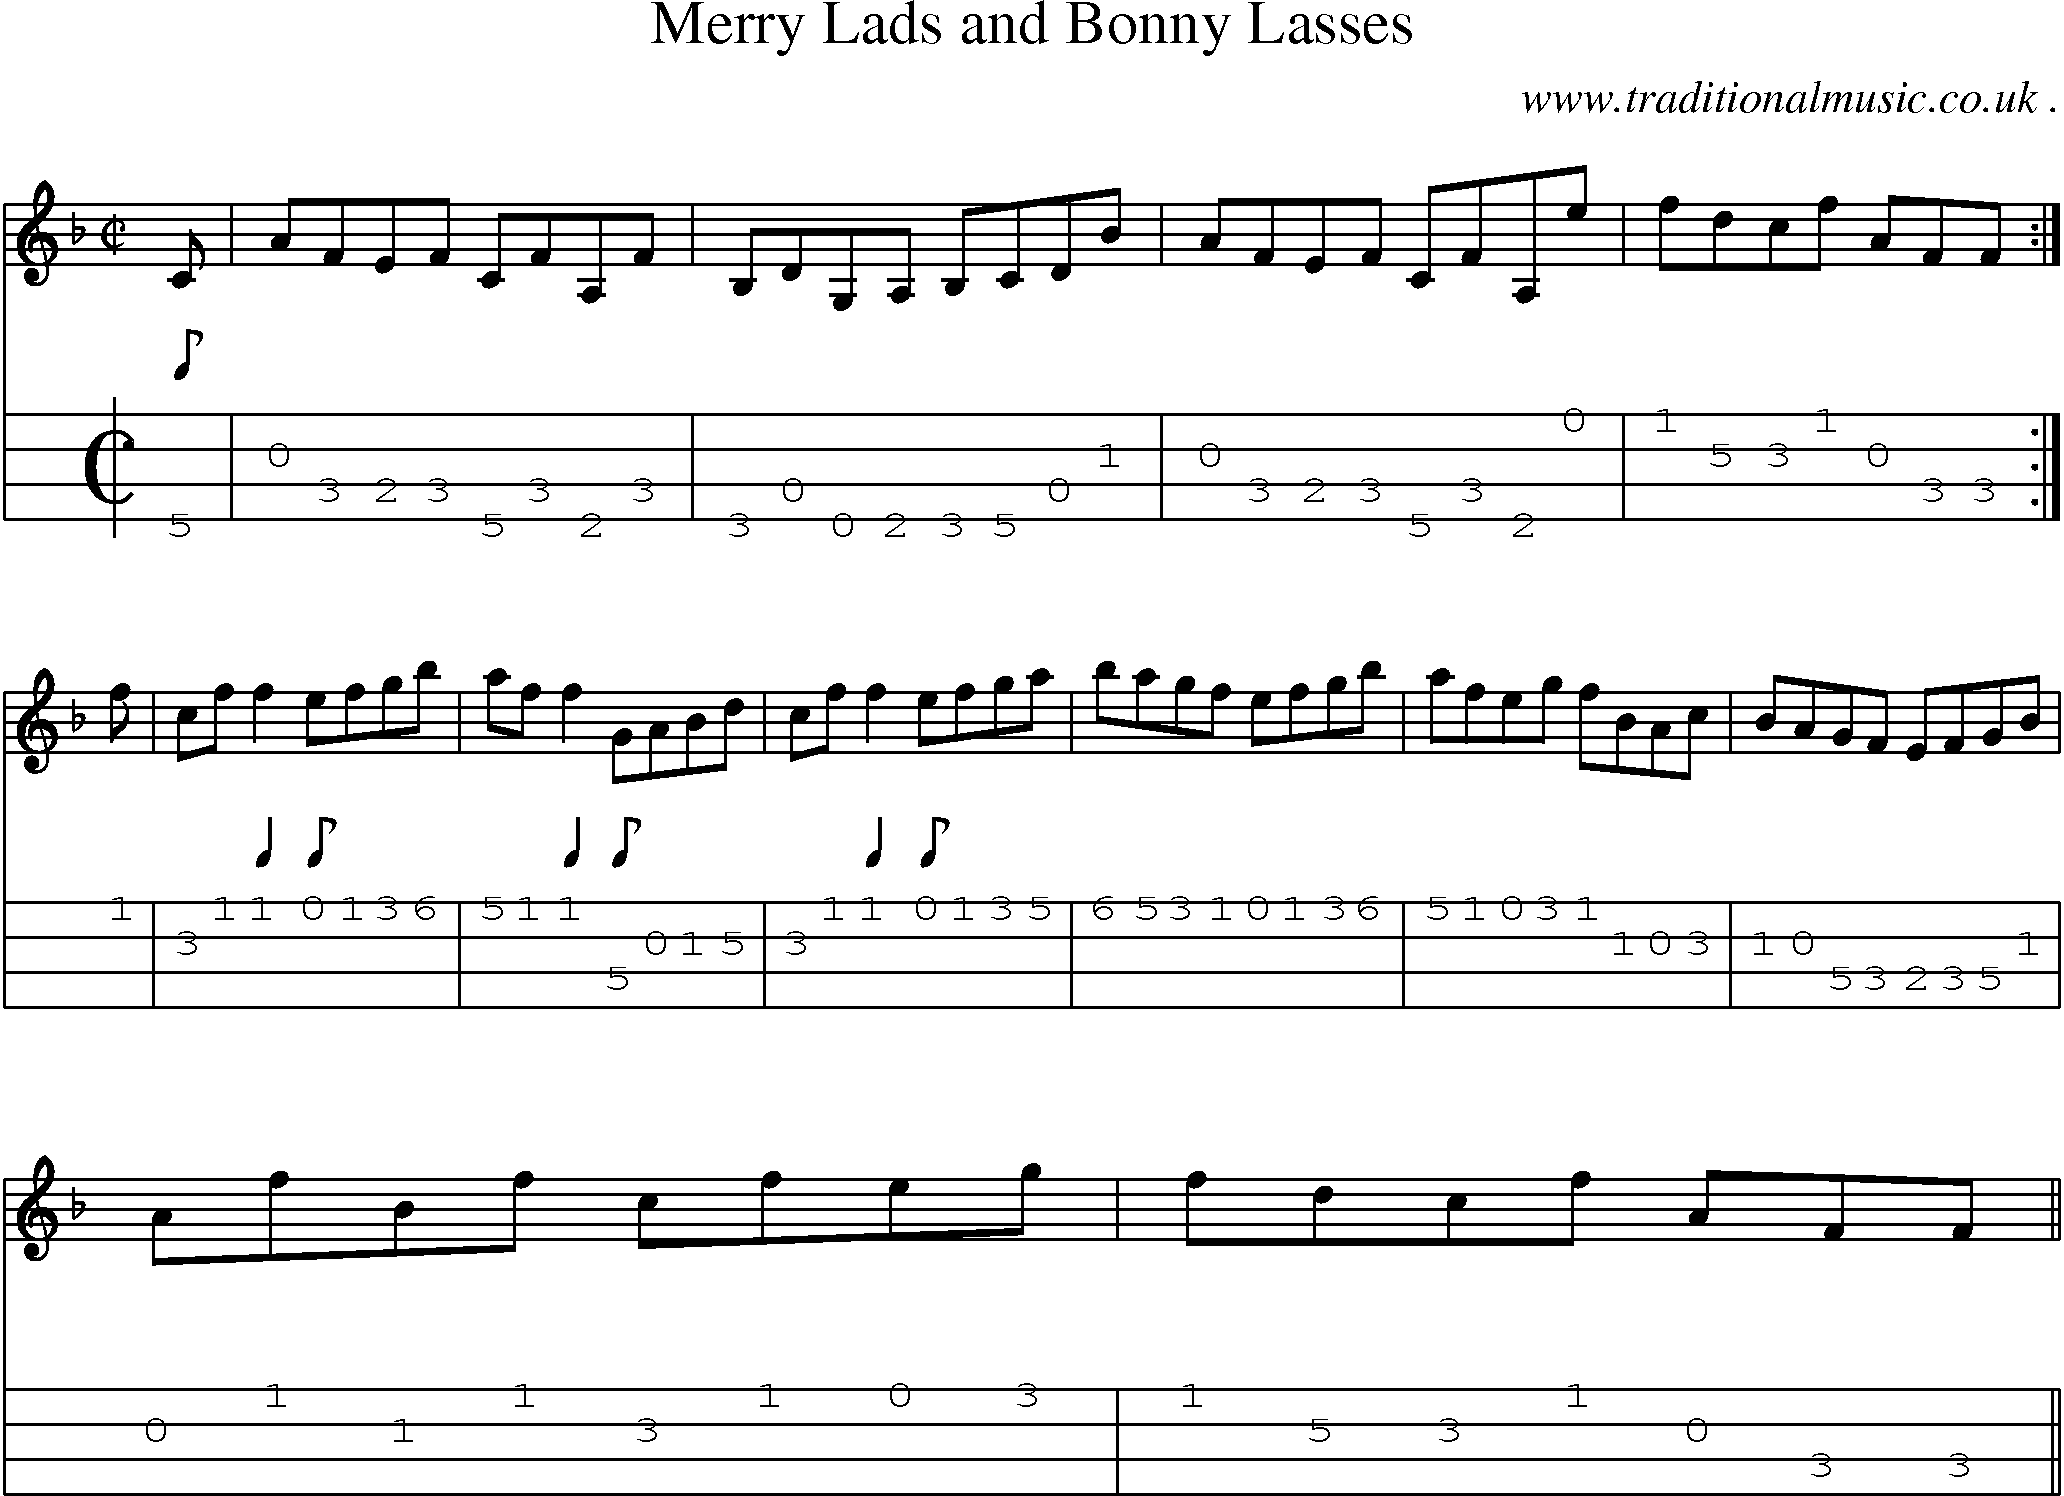 Sheet-music  score, Chords and Mandolin Tabs for Merry Lads And Bonny Lasses